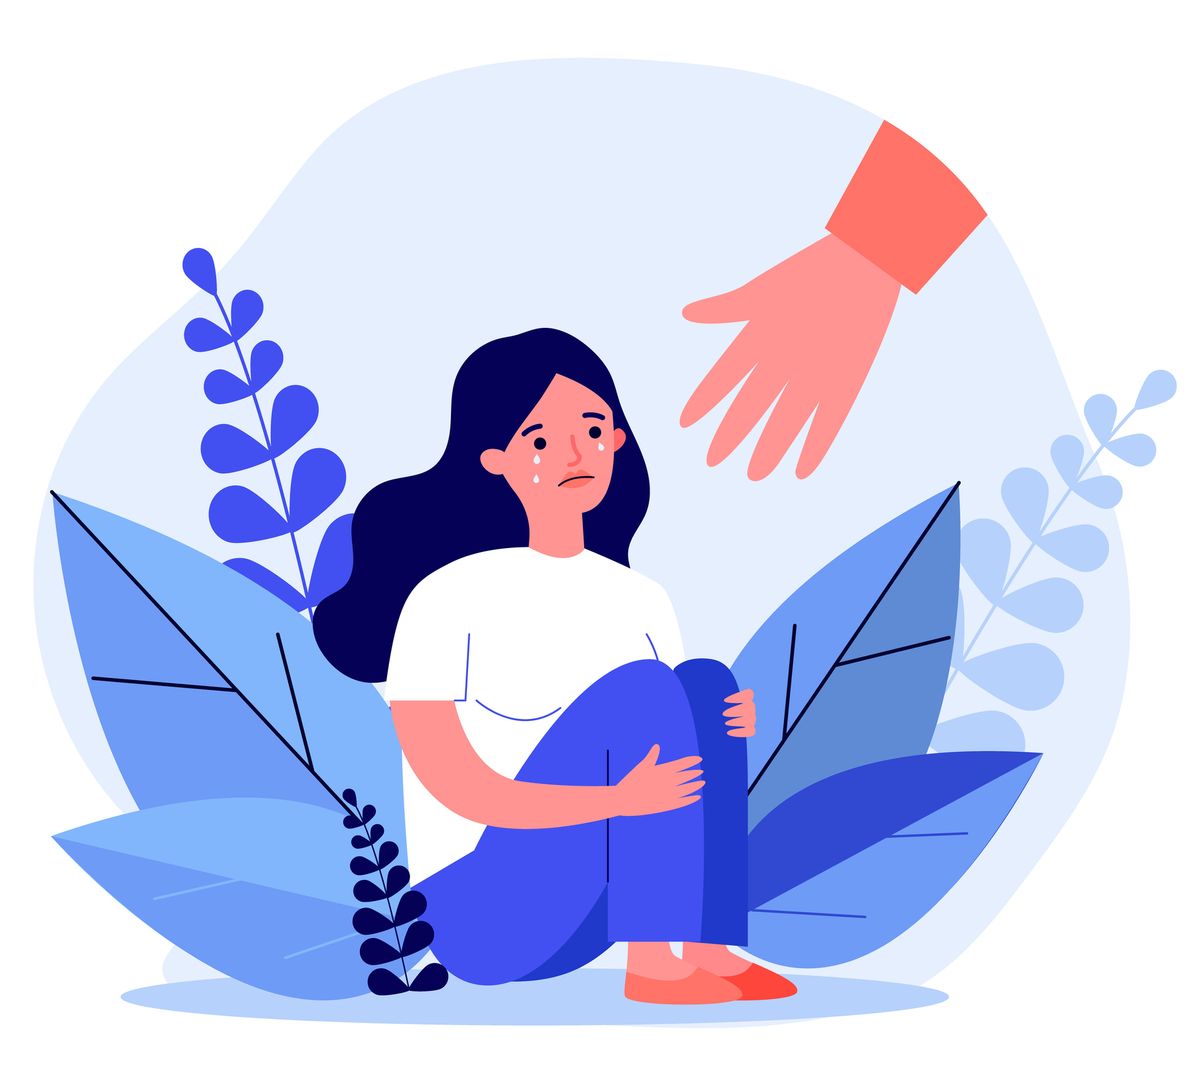 young woman getting help and cure from stress flat vector illustration girl feeling anxiety and loneliness helping hand psychotherapy, counseling and psychological support concept